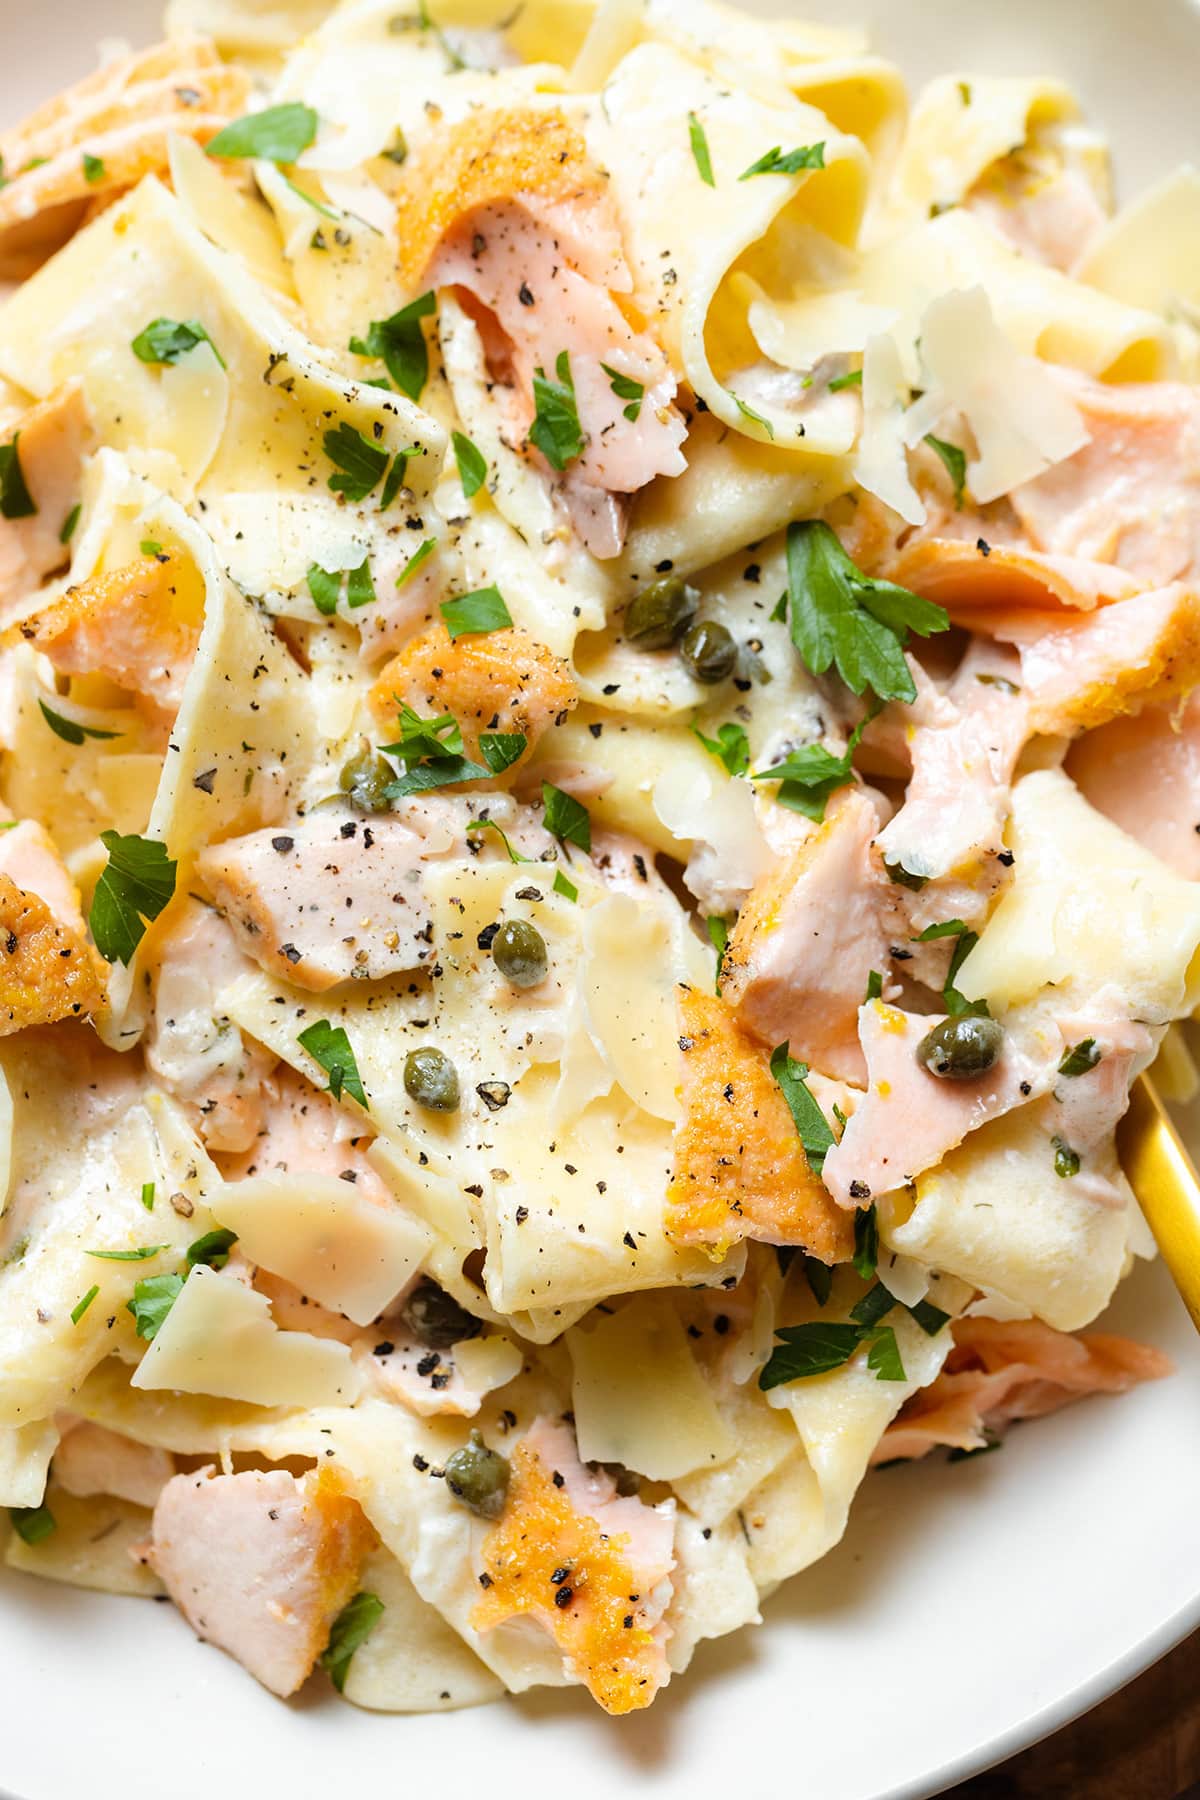 Pappardelle with roasted salmon, creamy white sauce, black pepper, and fresh herbs.